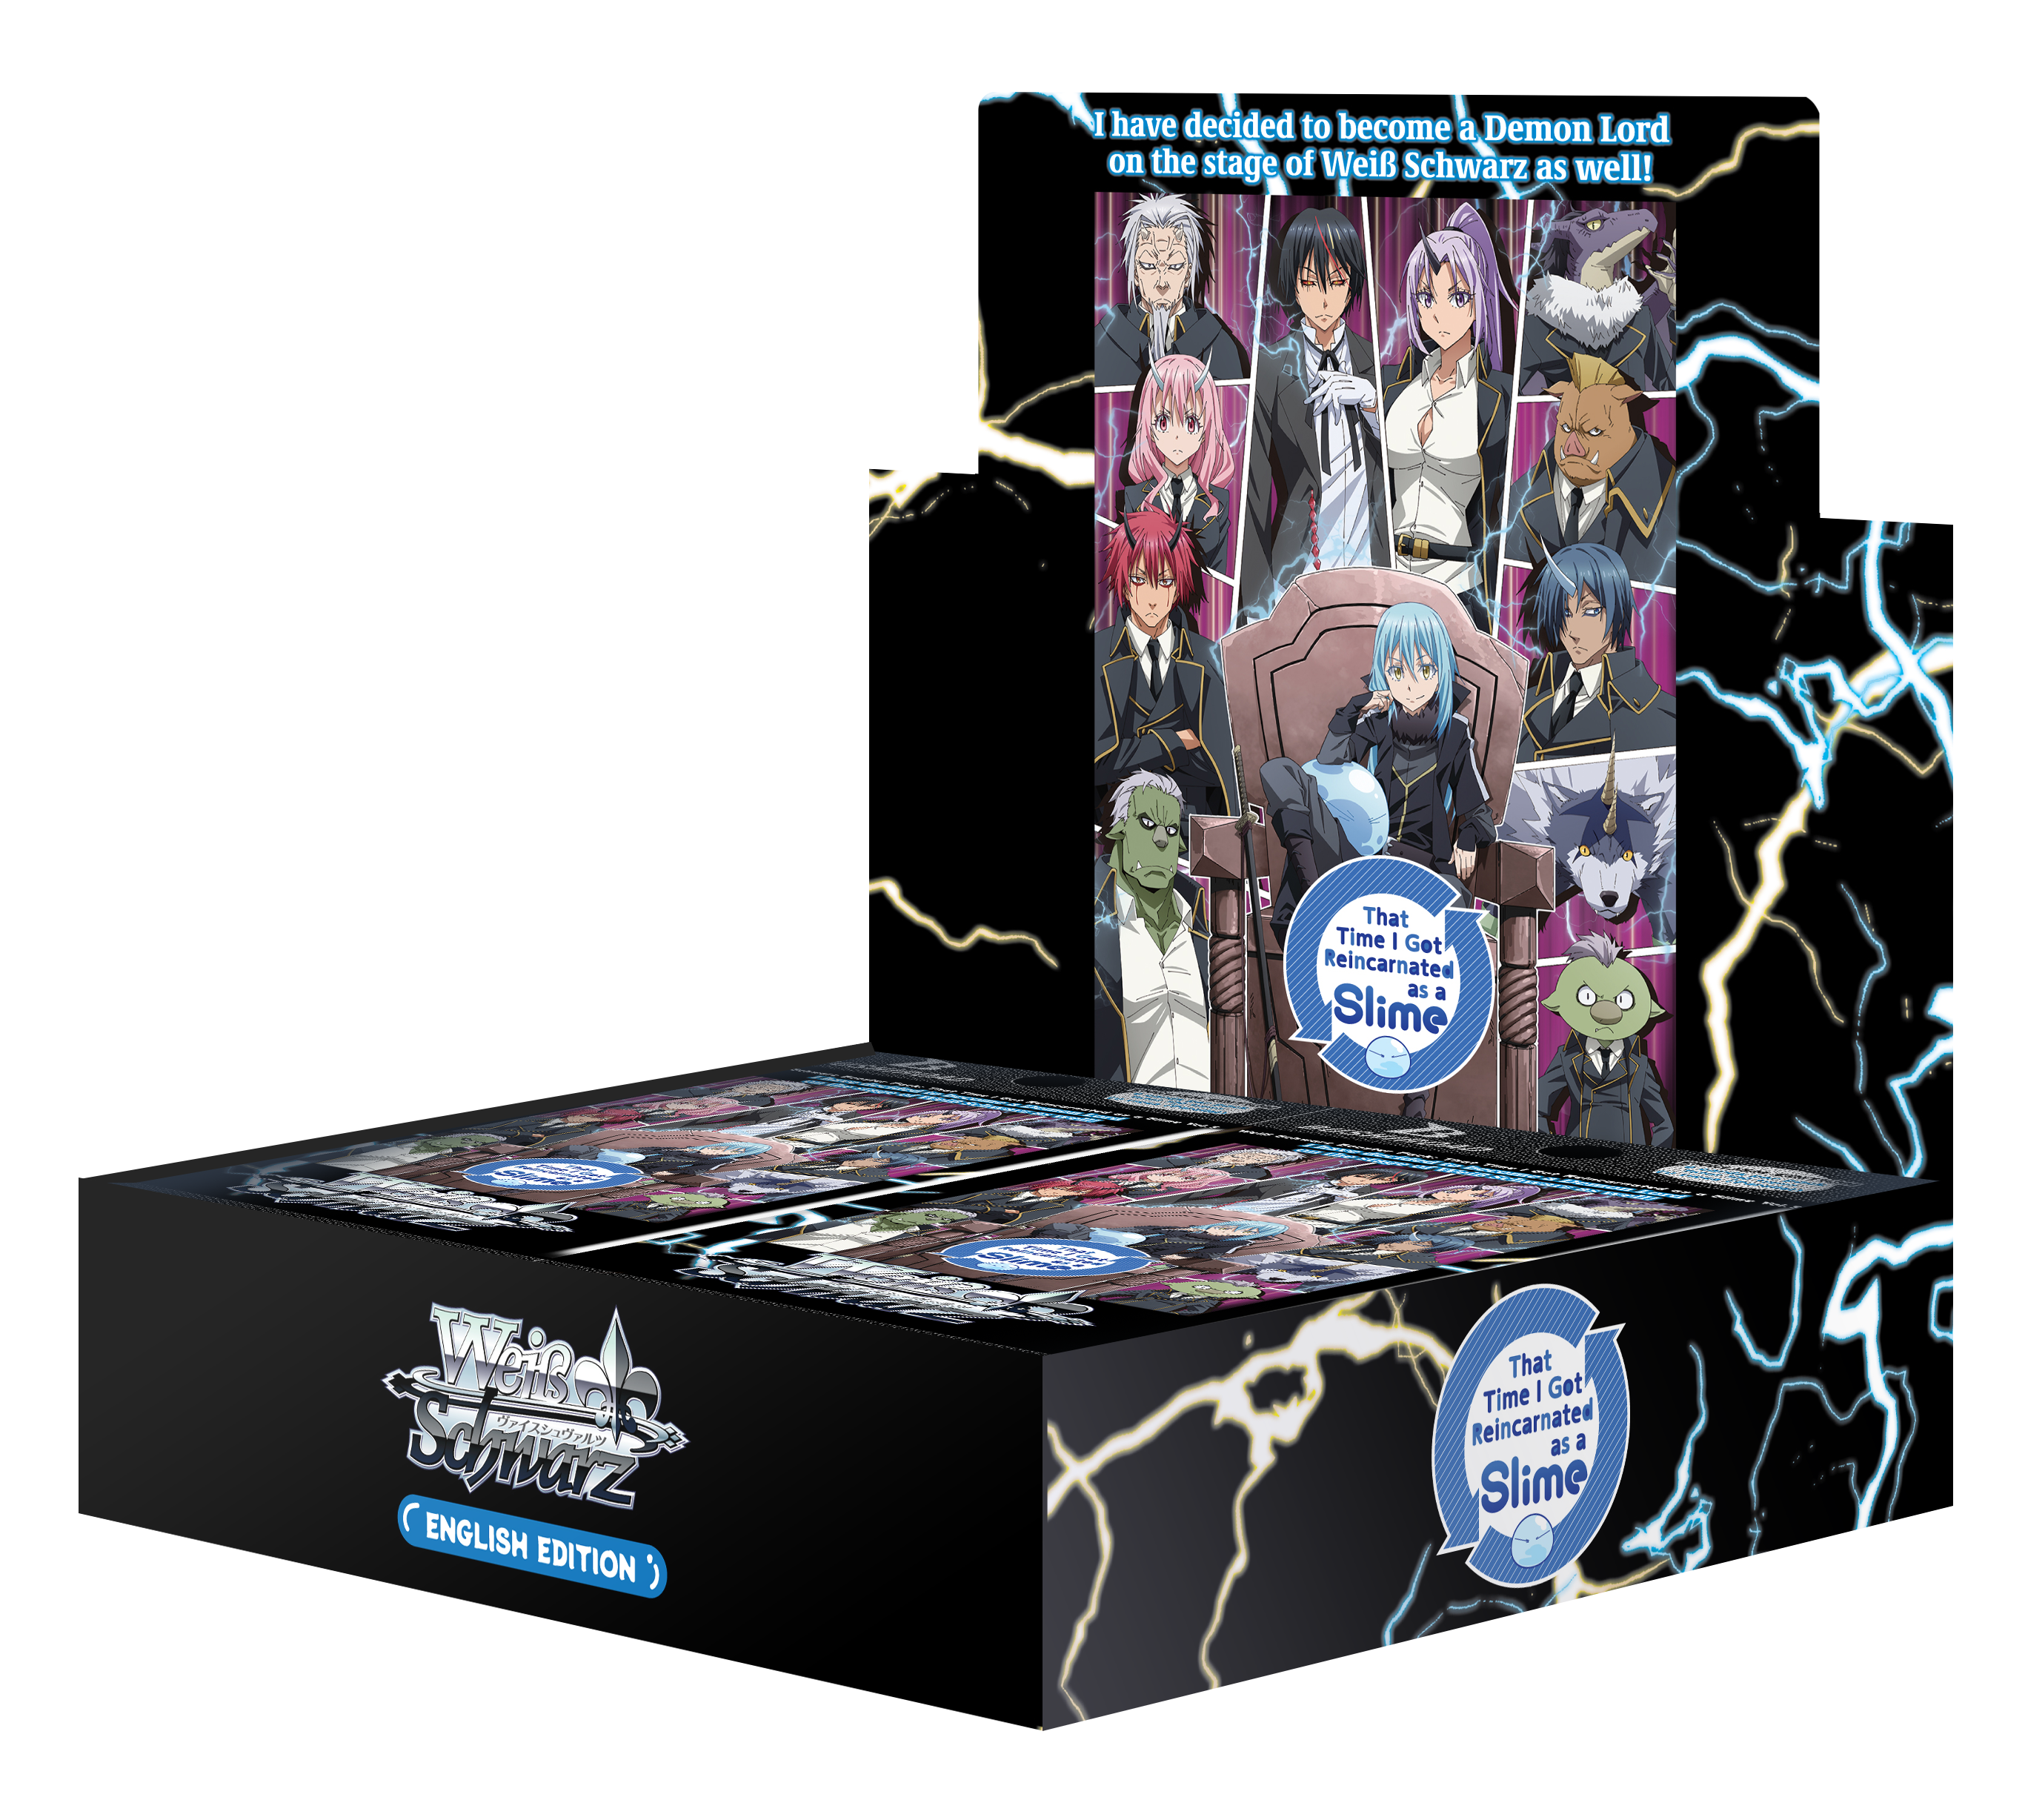 Weiss Schwarz - That Time I Got Reincarnated as a Slime Vol.3 - Booster Box (16 Packs)